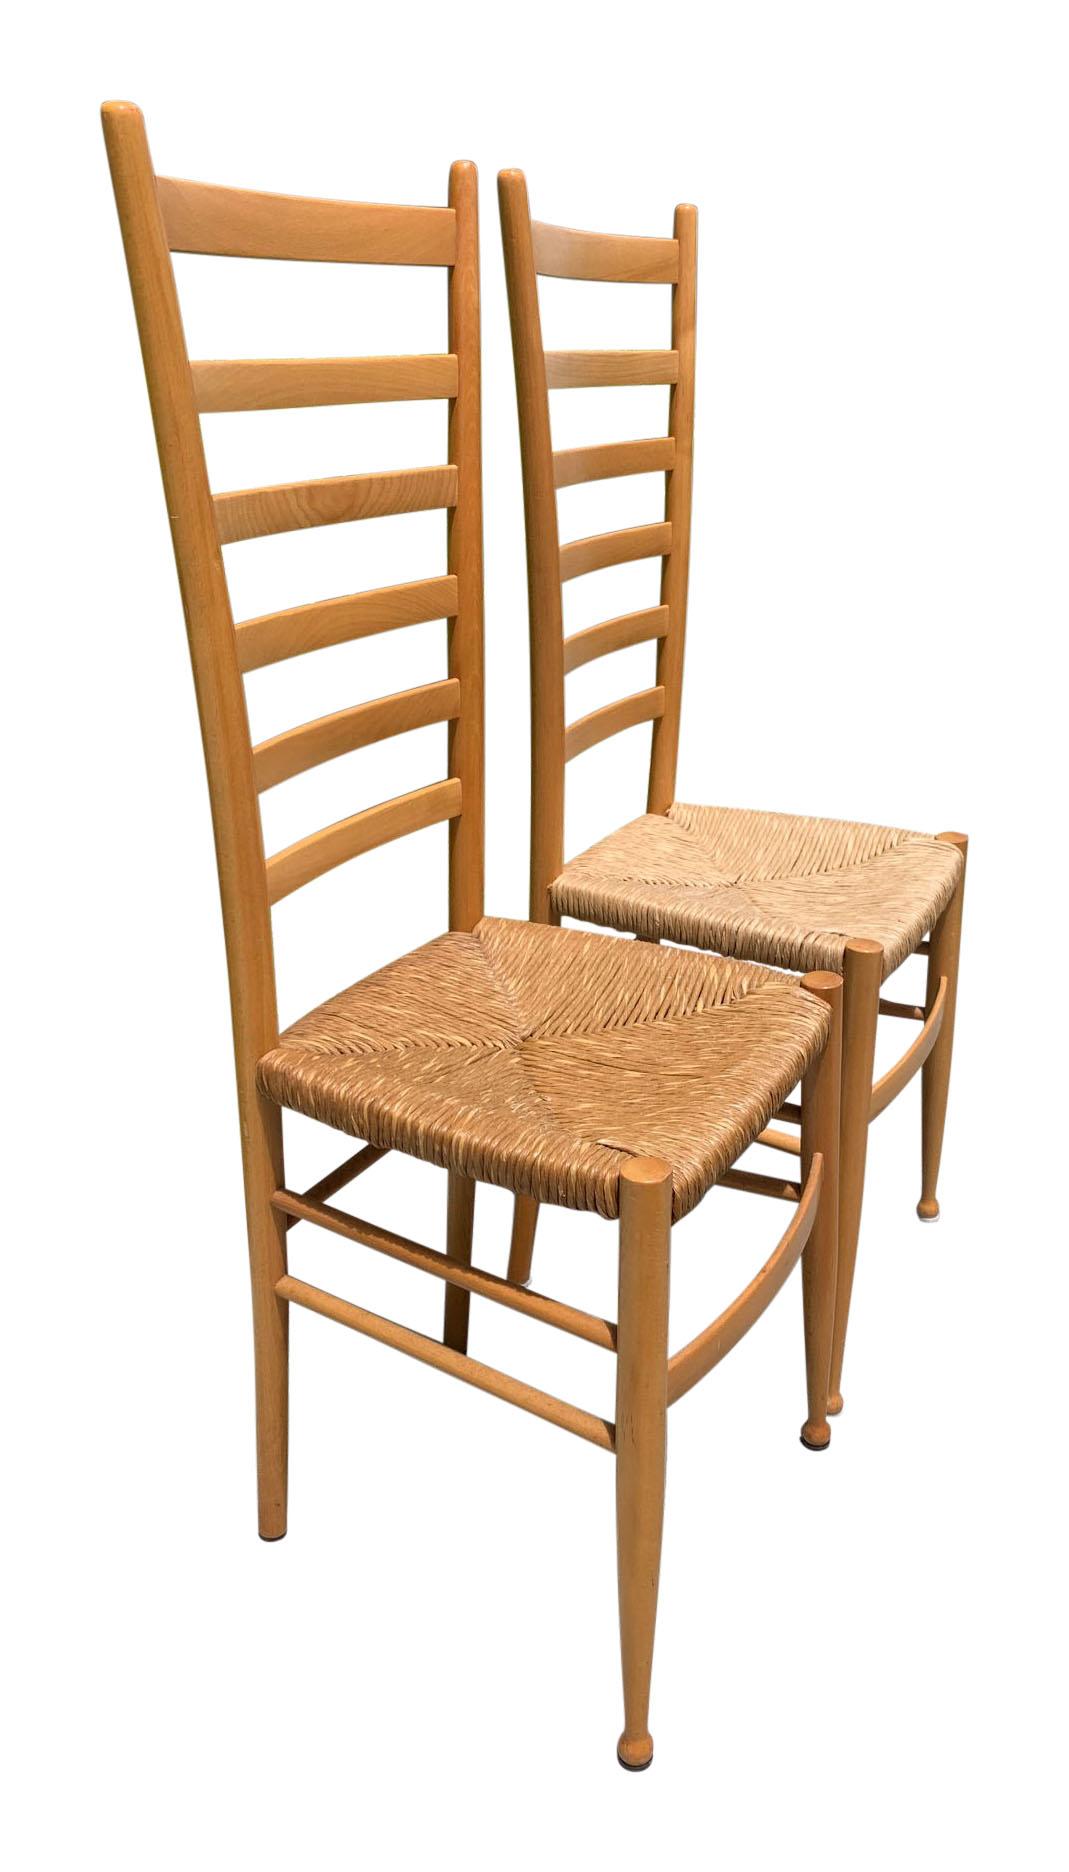 Pair of Wood Italian Ladder Back Chairs Attributed to Gio Ponti with Rush Seats. Woven, grass cloth. Mid-century modern